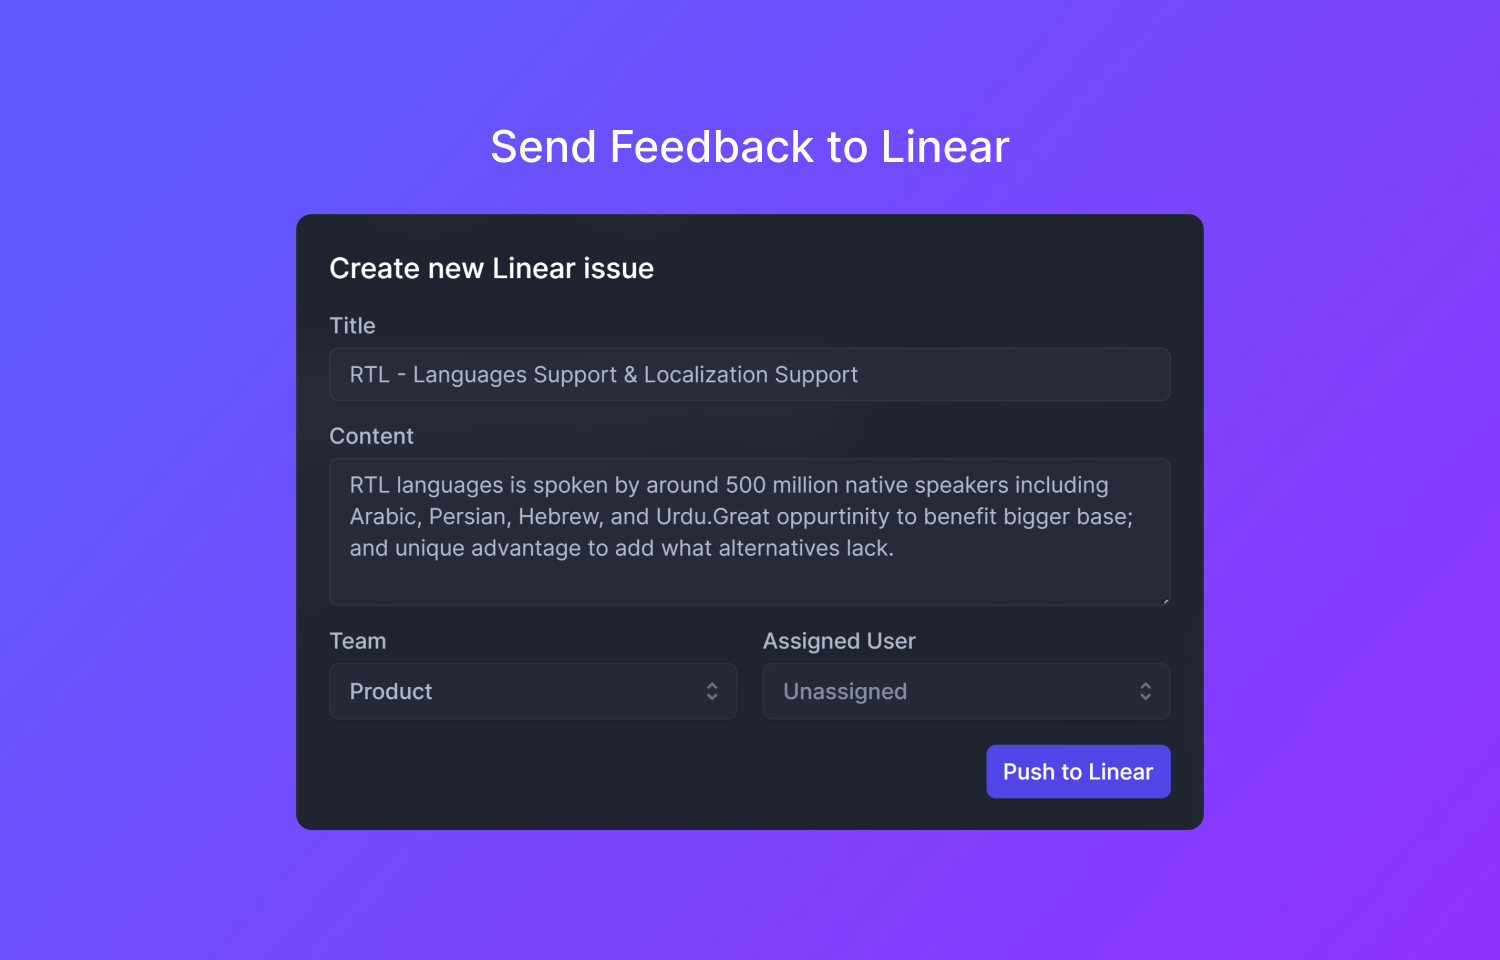 Featurebase interface showing creation of Linear issue from feedback